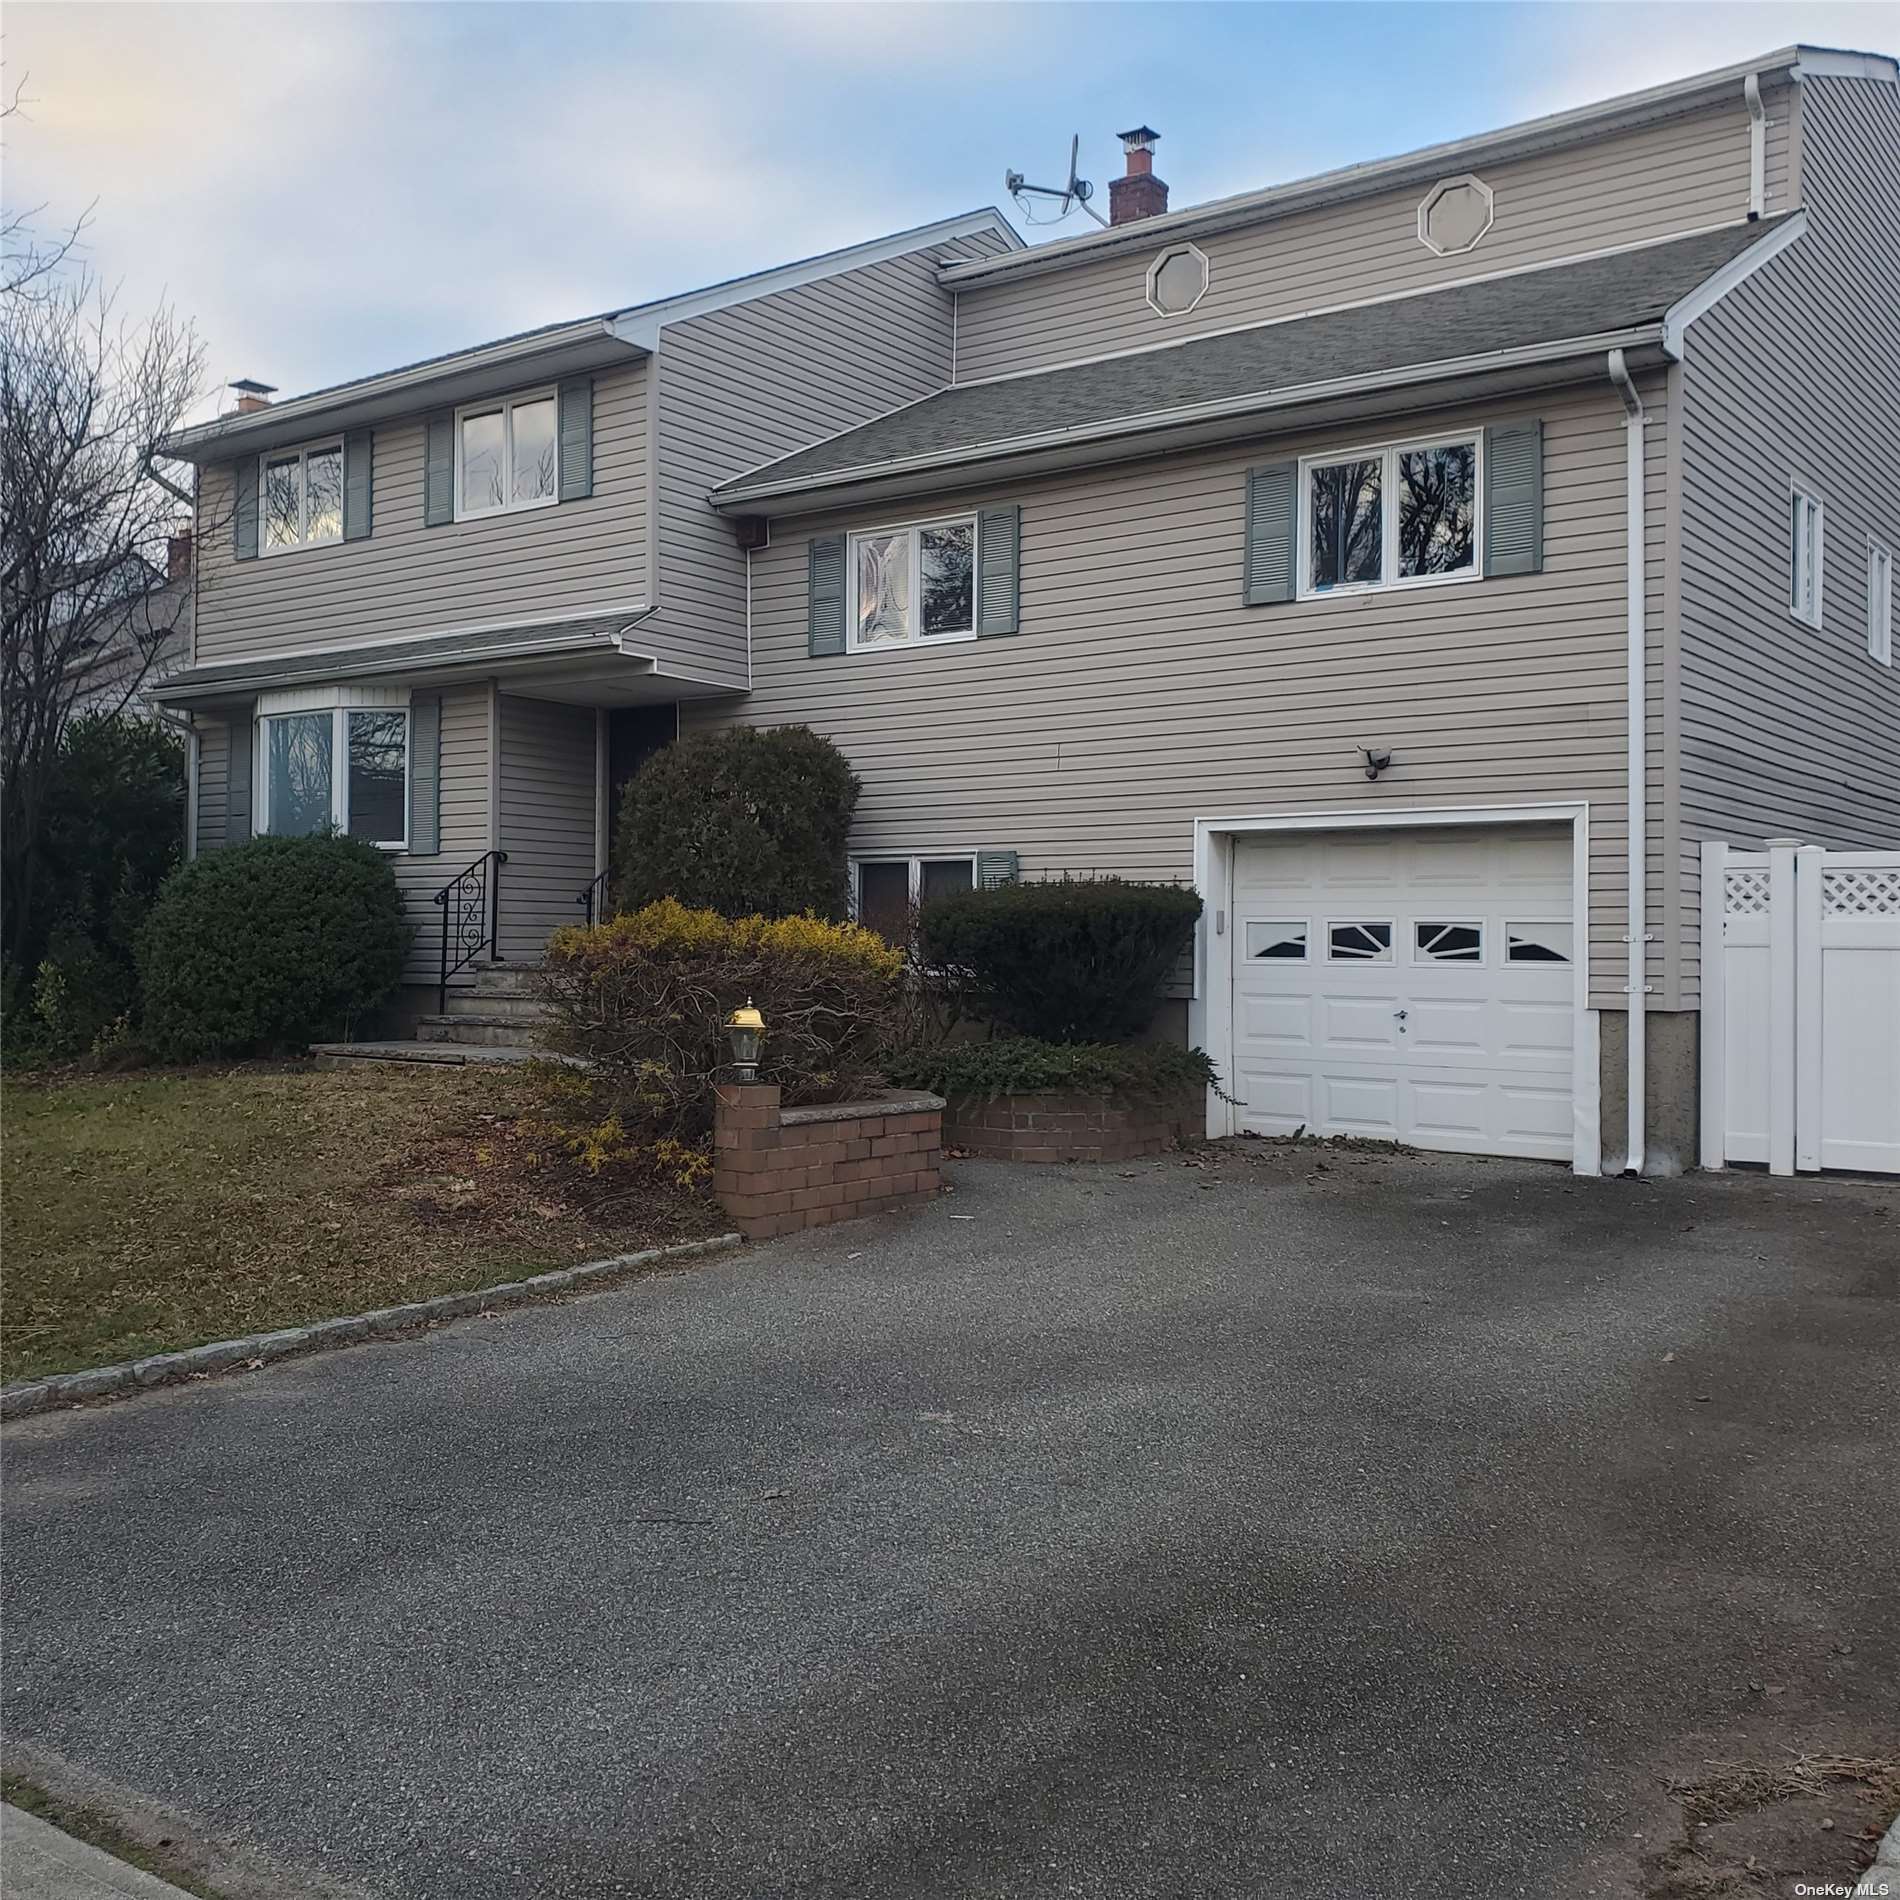 Listing in Syosset, NY